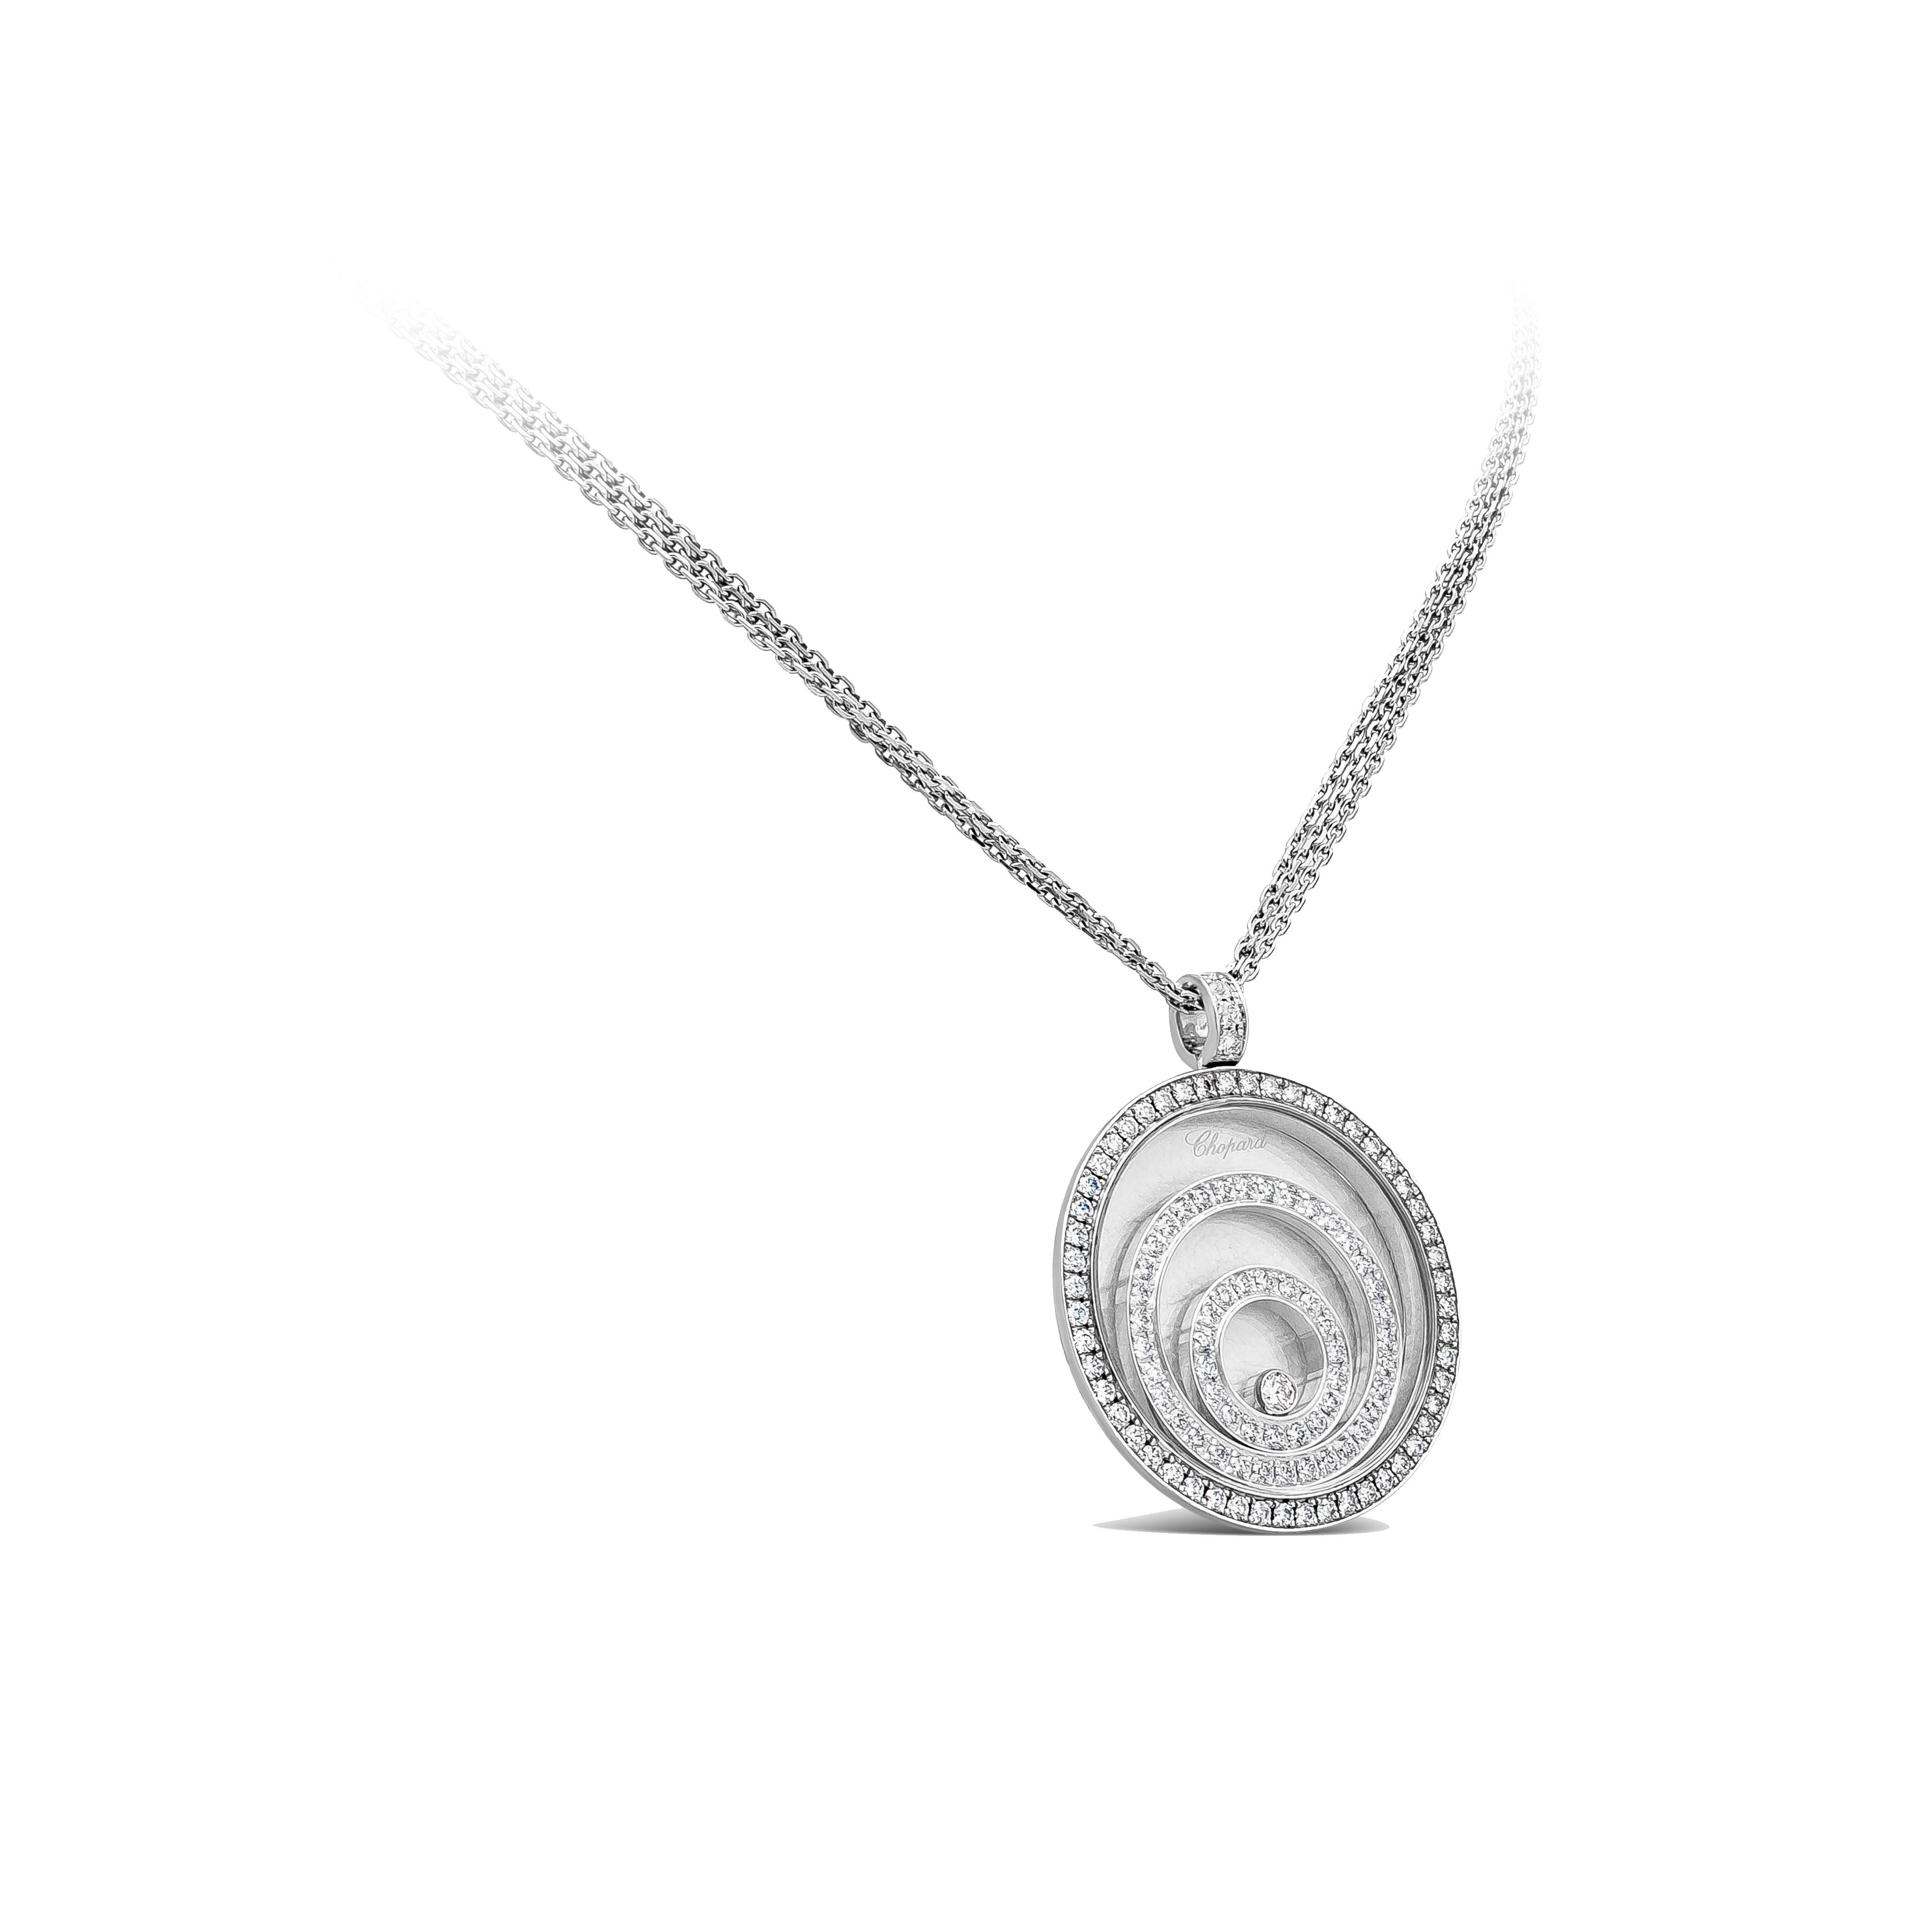 This gorgeous Chopard necklace is from the Happy Spirit Collection. The pendant is decorated with 2 concentric circles encased in the pendant and is set with brilliant round diamonds weighing 1.88 carats. A 0.10 carat round brilliant happy diamond